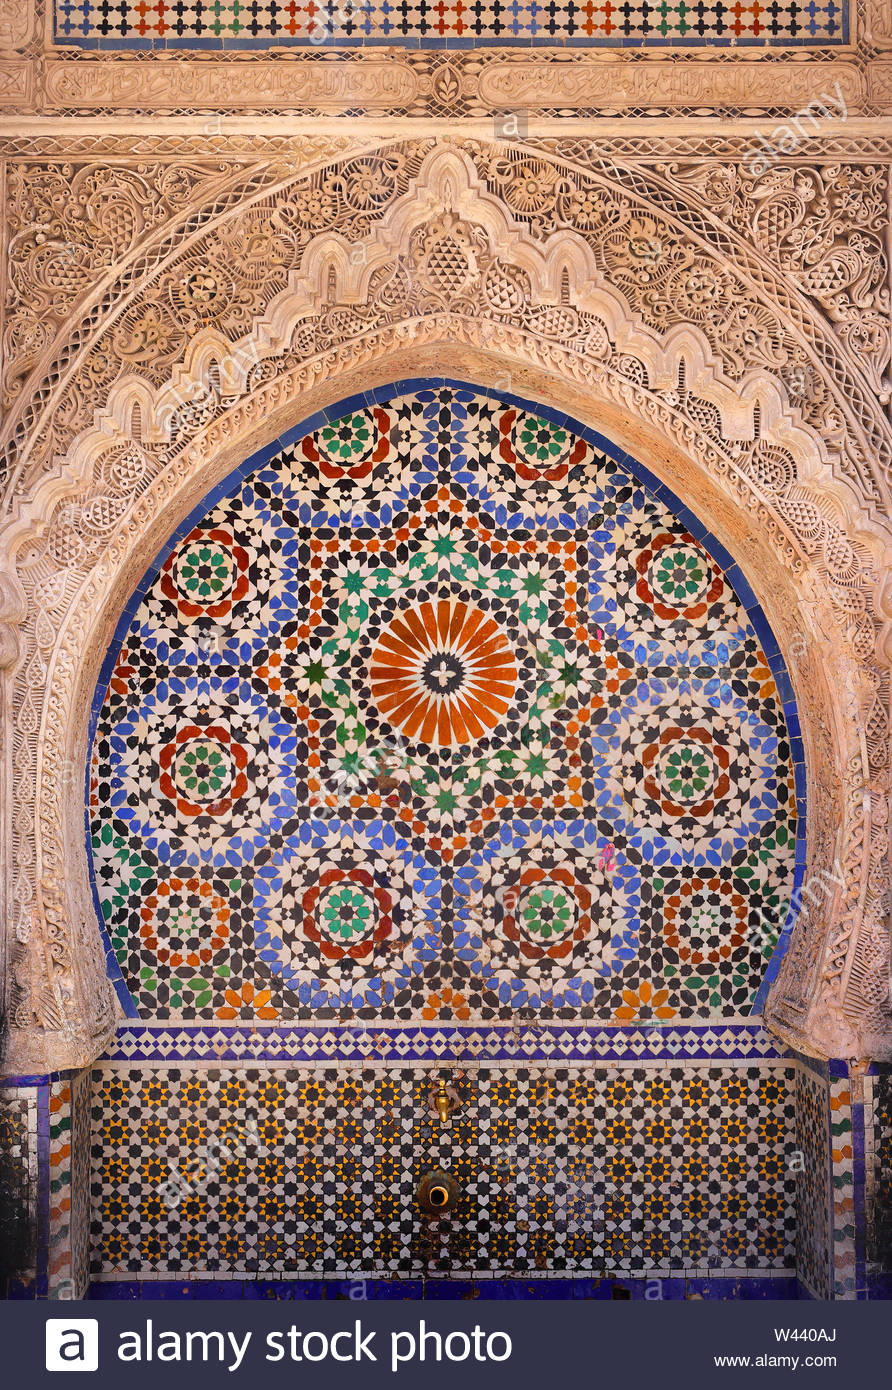 Morocco Detail Of An Old Fountain Decorated With Glazed Ceramic